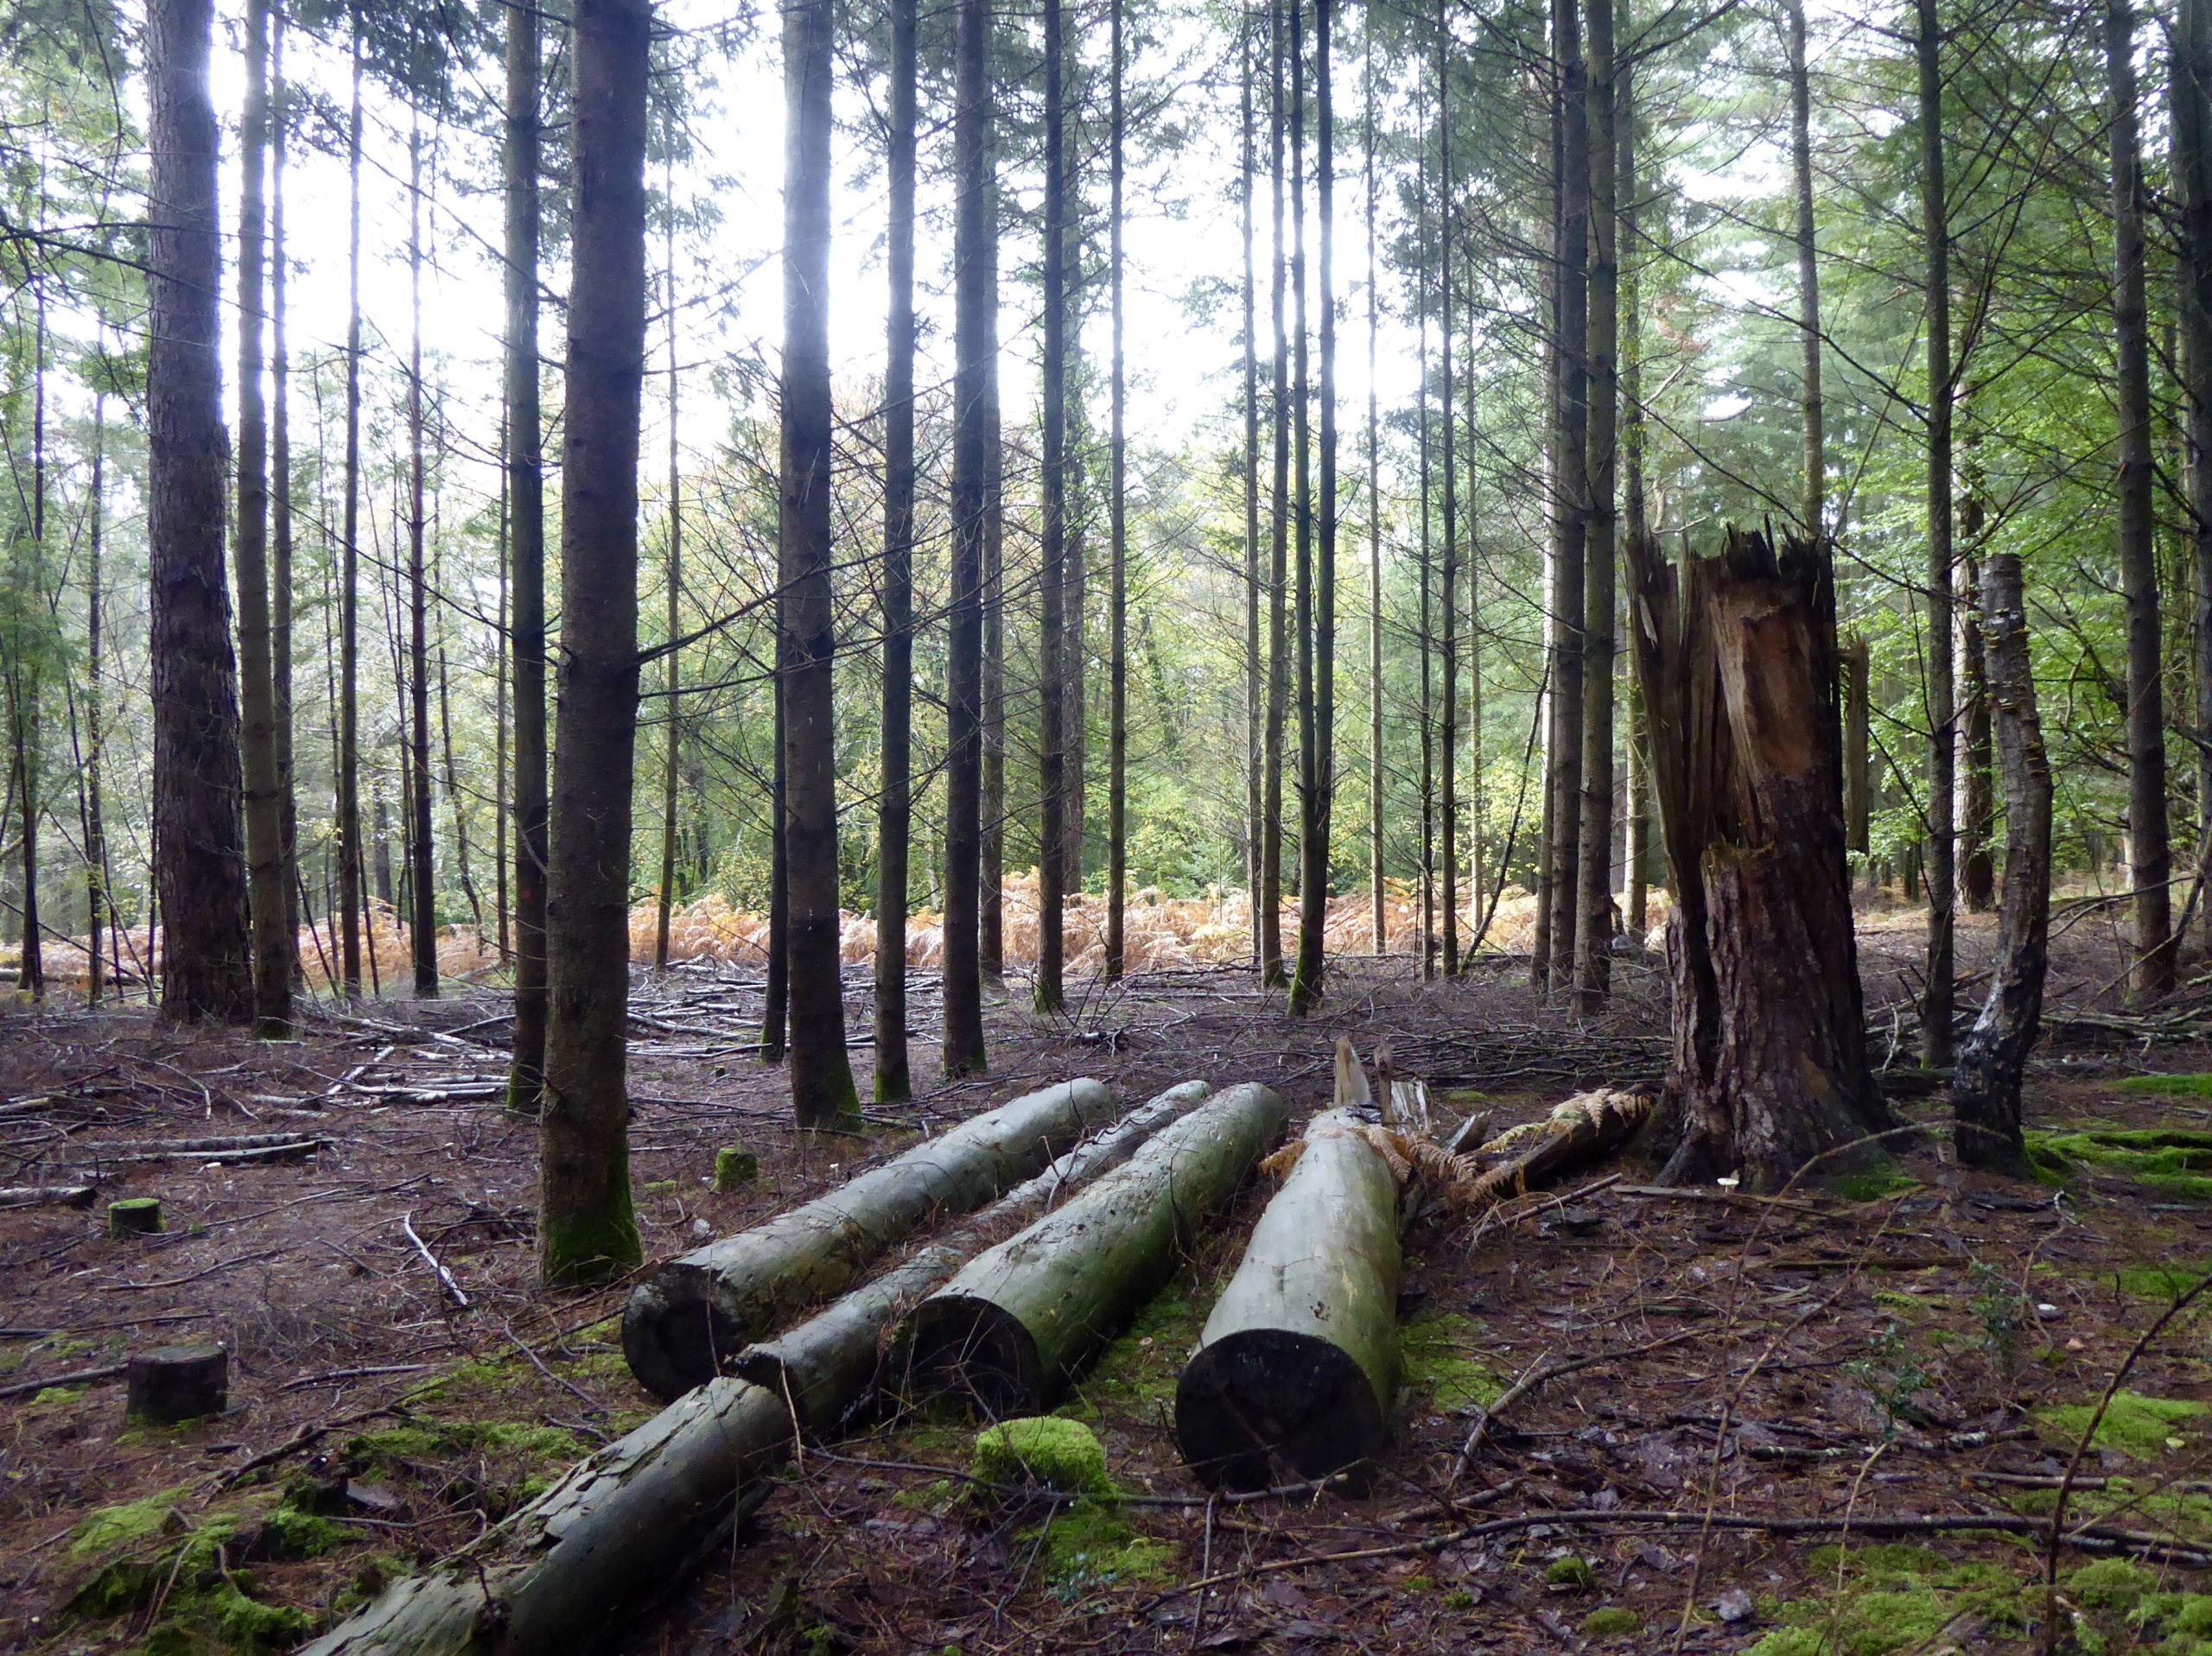 Five large felled logs lay among many tall slim trees